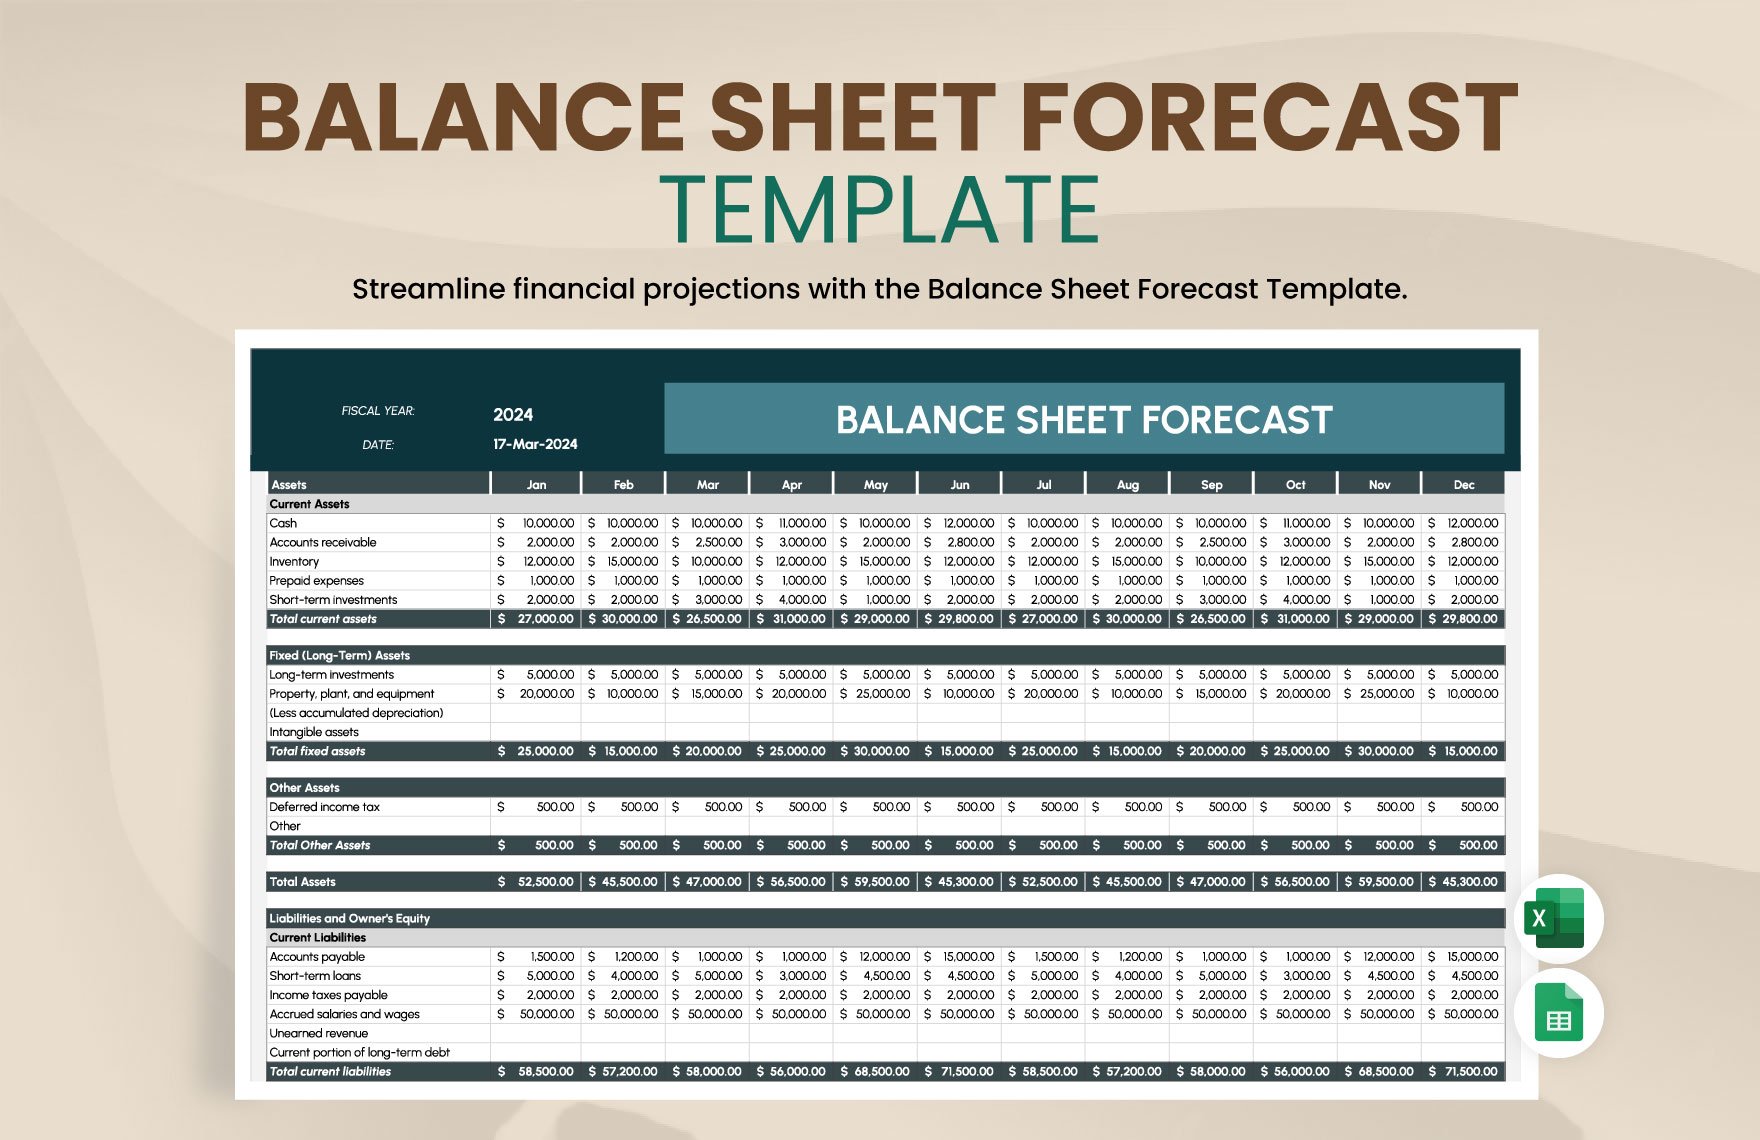 Balance Sheet Forecast Template in Excel, Google Sheets